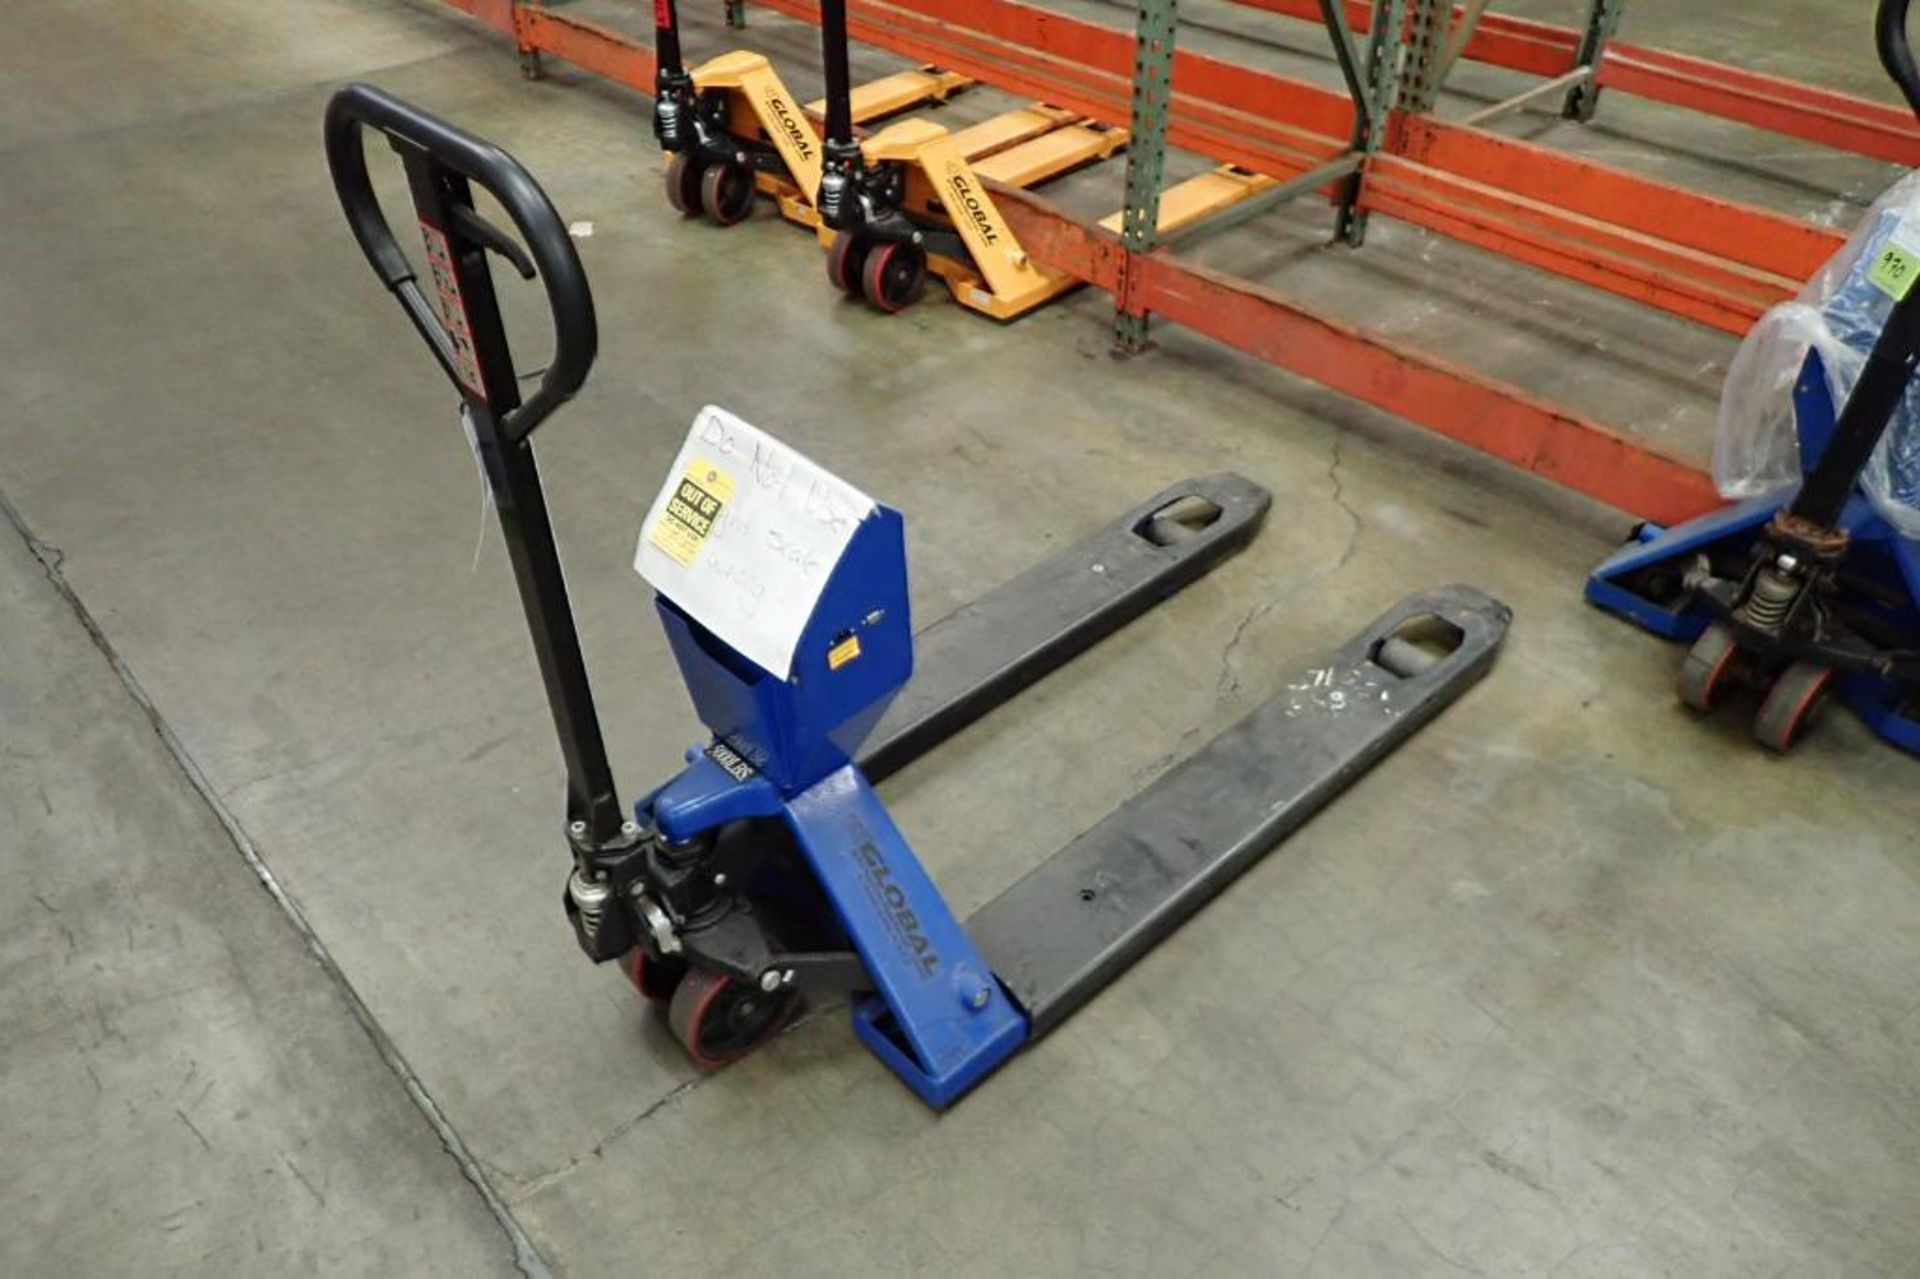 Global Industrial hand pallet jack, SN 377847, with Mettler Toledo on board scale, 5000 lb capacity, - Image 3 of 7